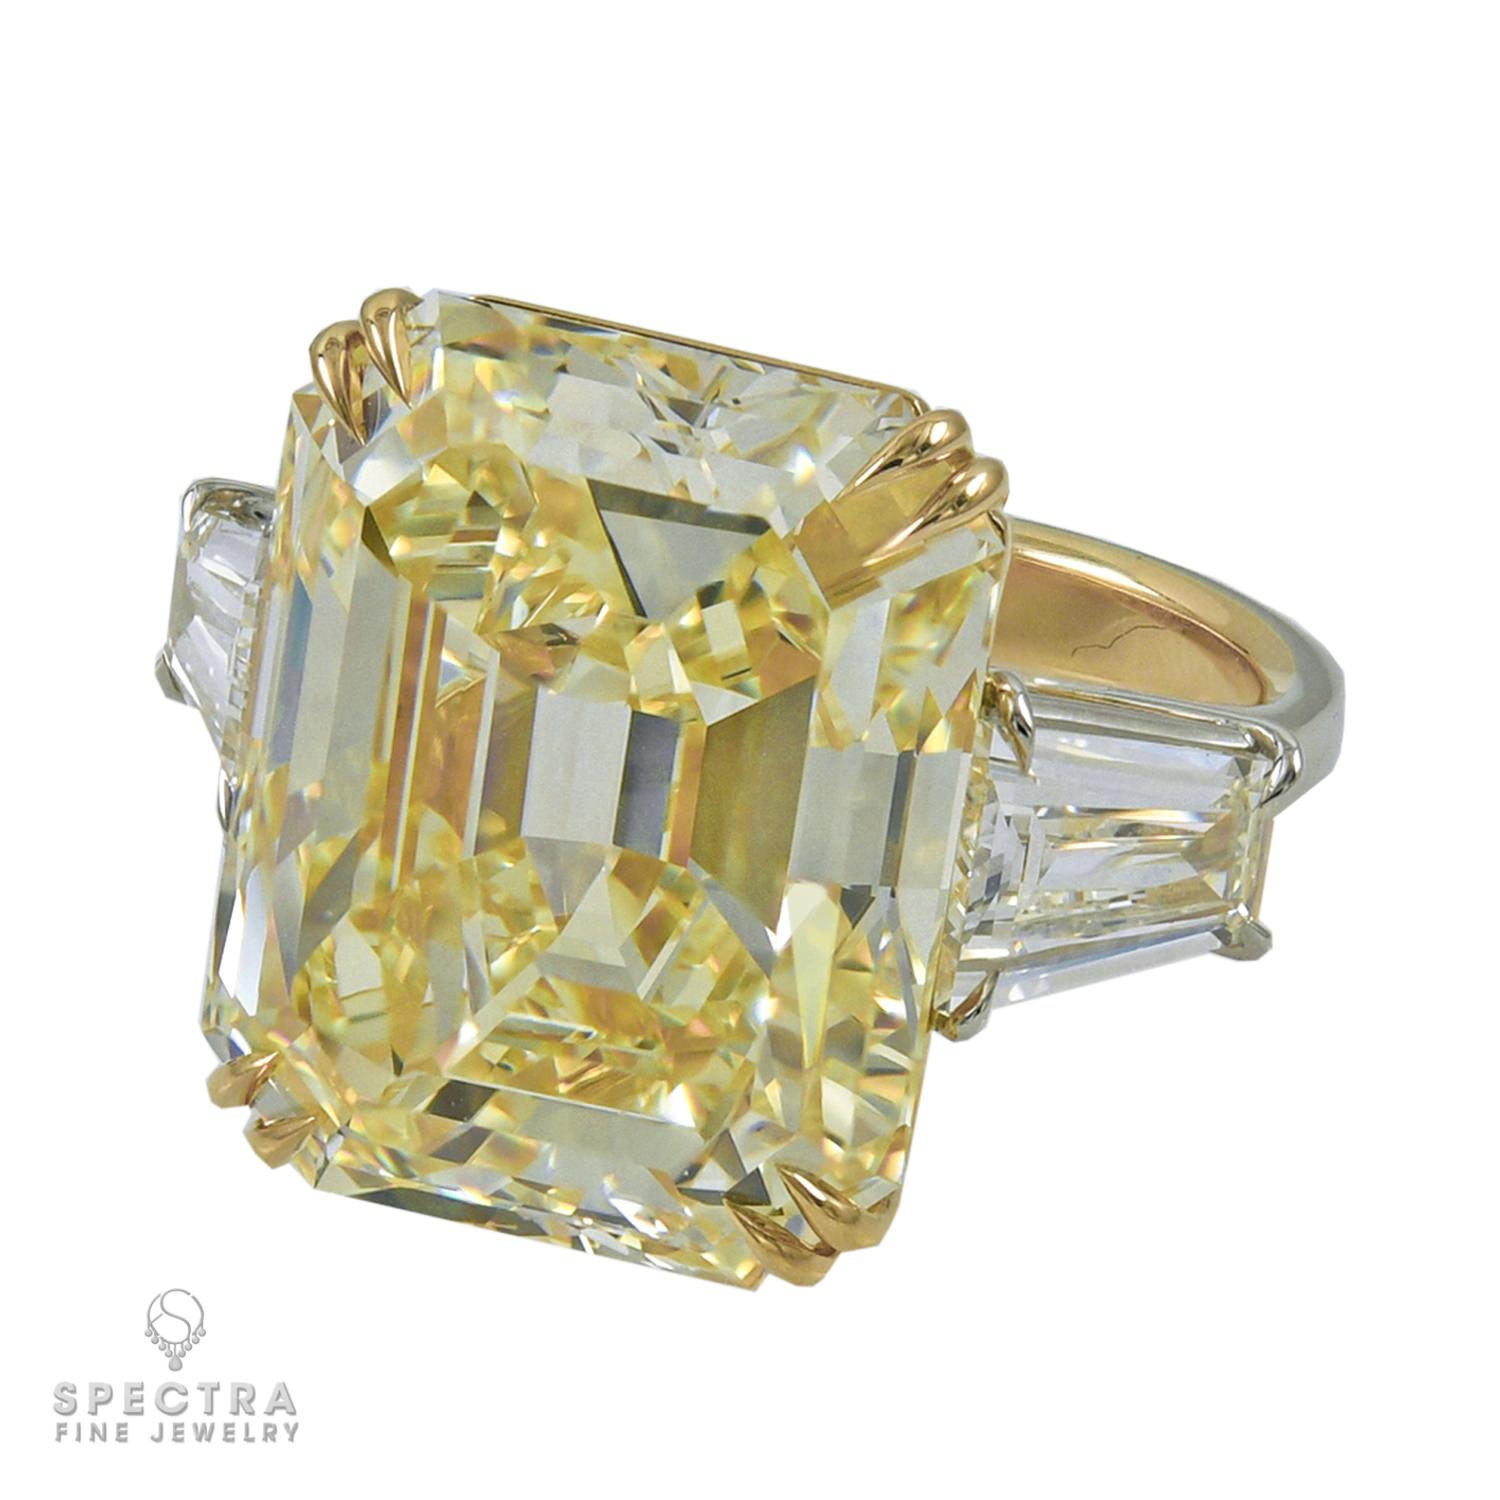 This Art Deco-inspired platinum and 18K gold ring made by Spectra Fine Jewelry in 2022 is stunning as a cocktail, engagement, or celebration ring, featuring a very large emerald-cut fancy yellow diamond, weighing approximately 23.16 carats. The